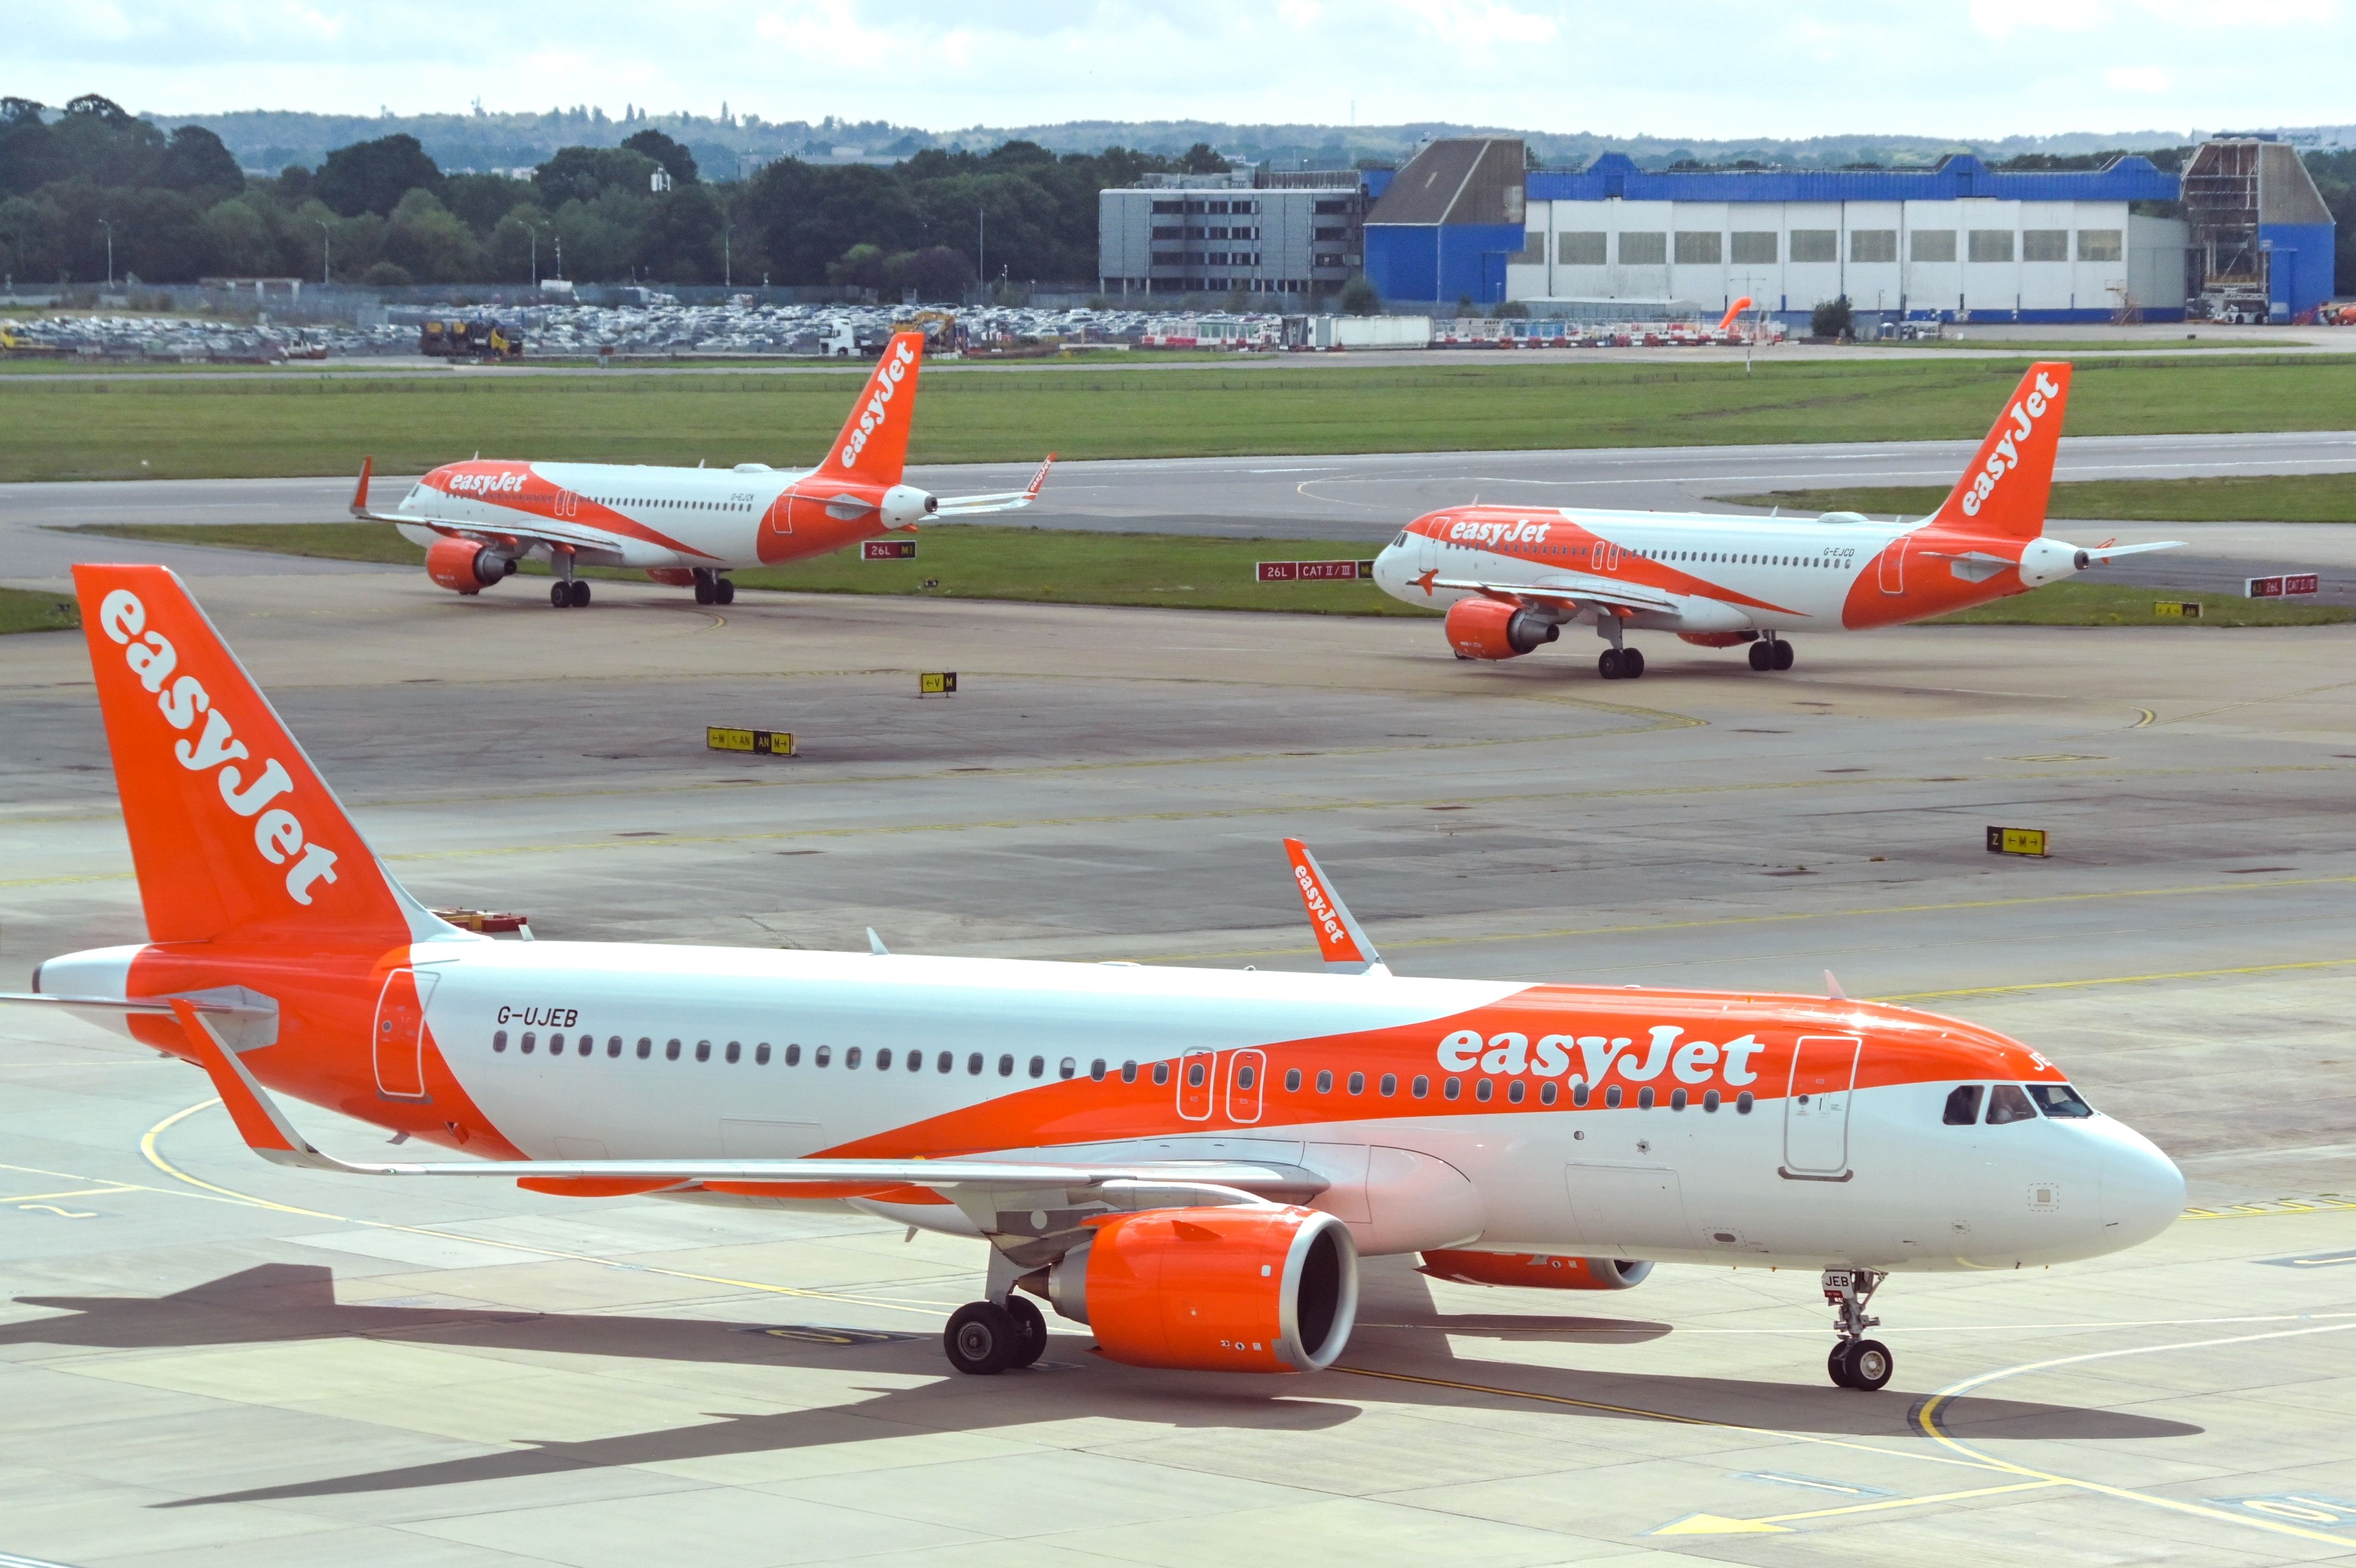 Several easyJet aircraft On The Apron At London Gatwick Airport.